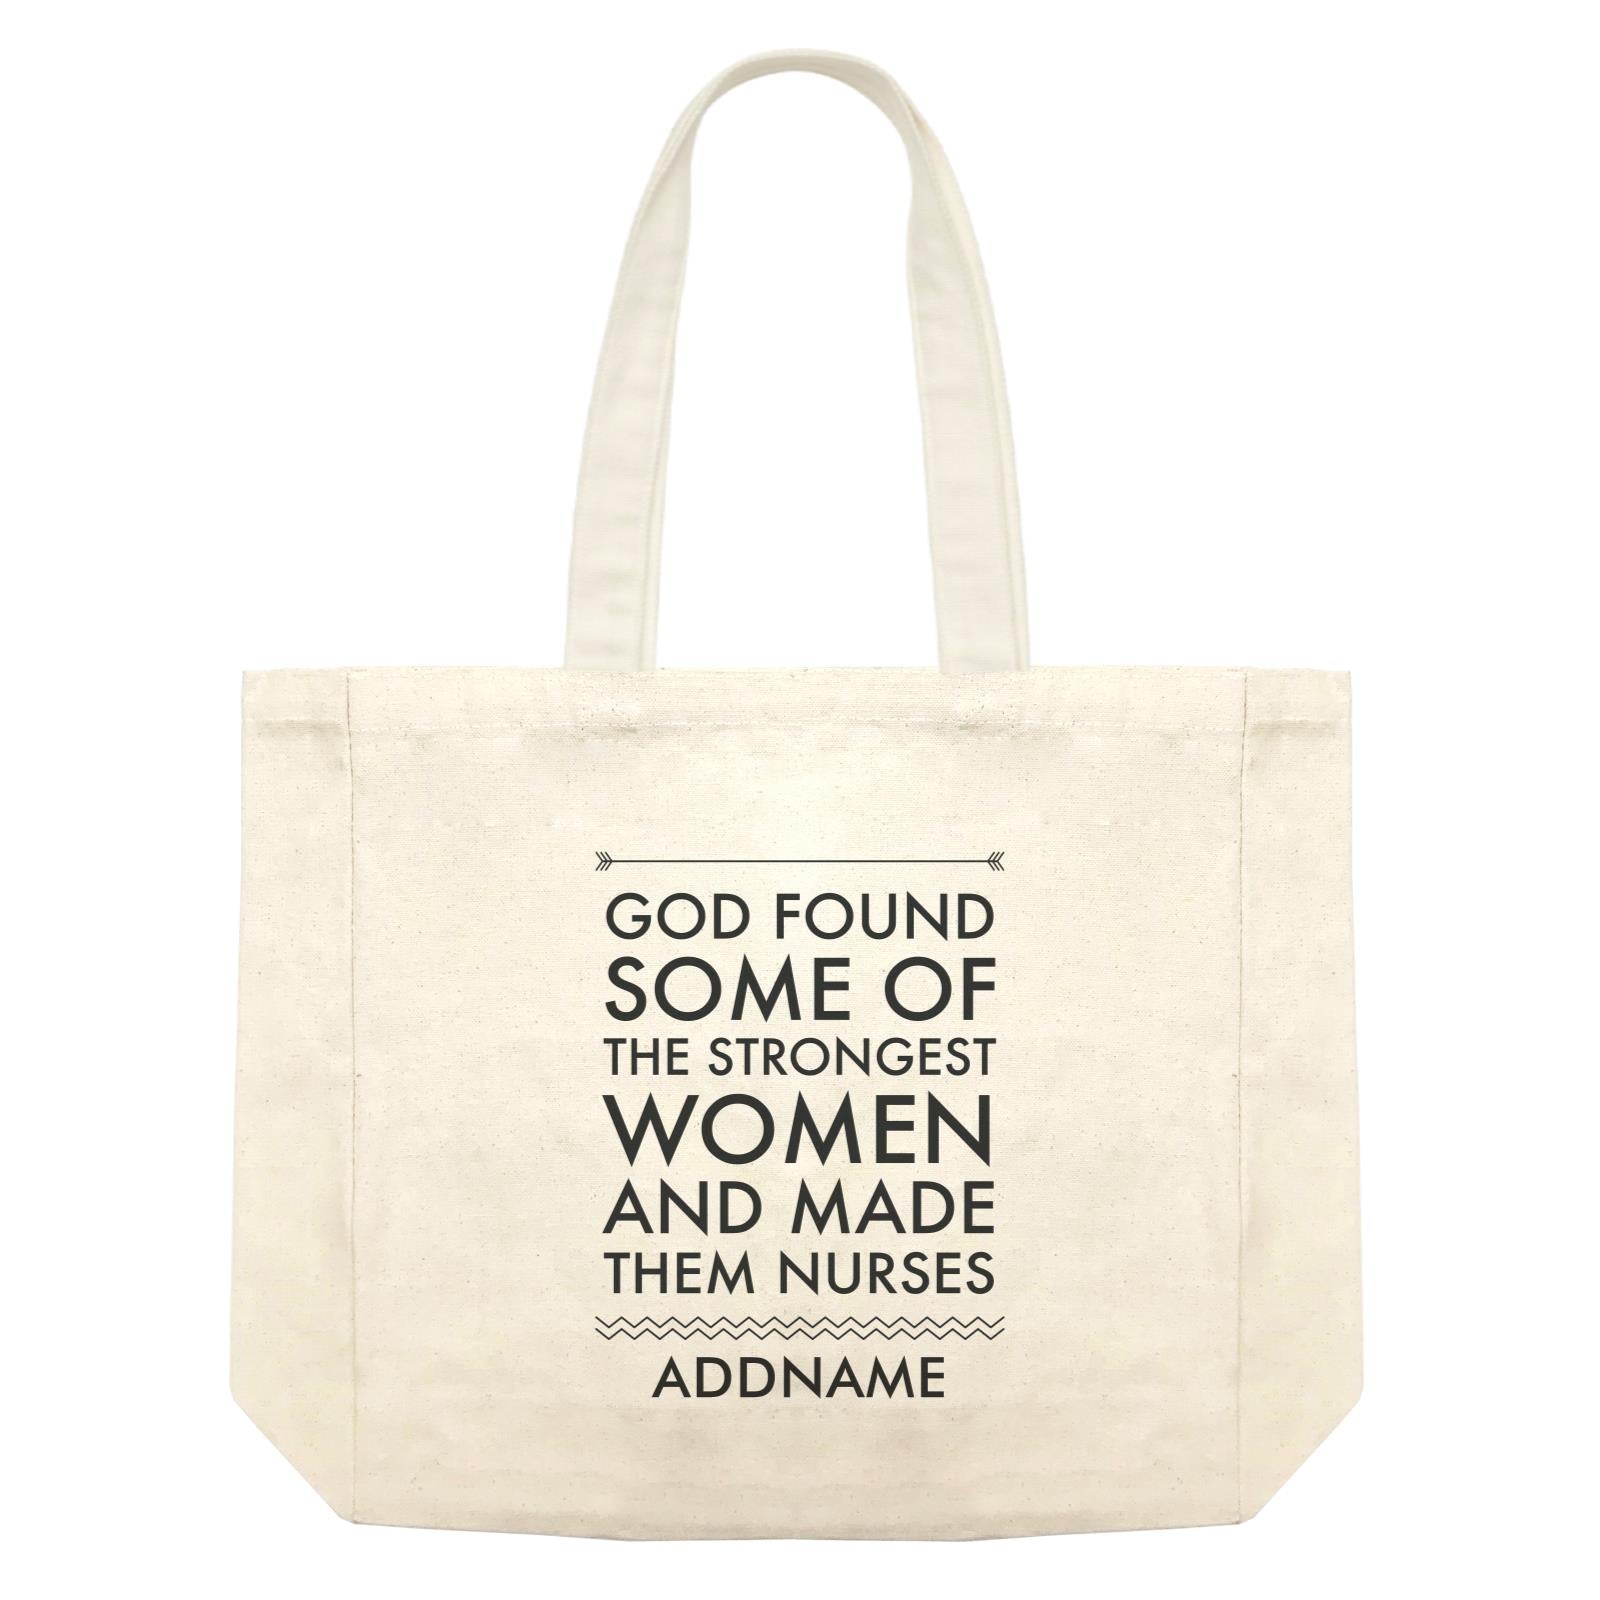 Nurse Quotes God Found Some Of The Strongest Woman And Made Them Nurses Addname Shopping Bag